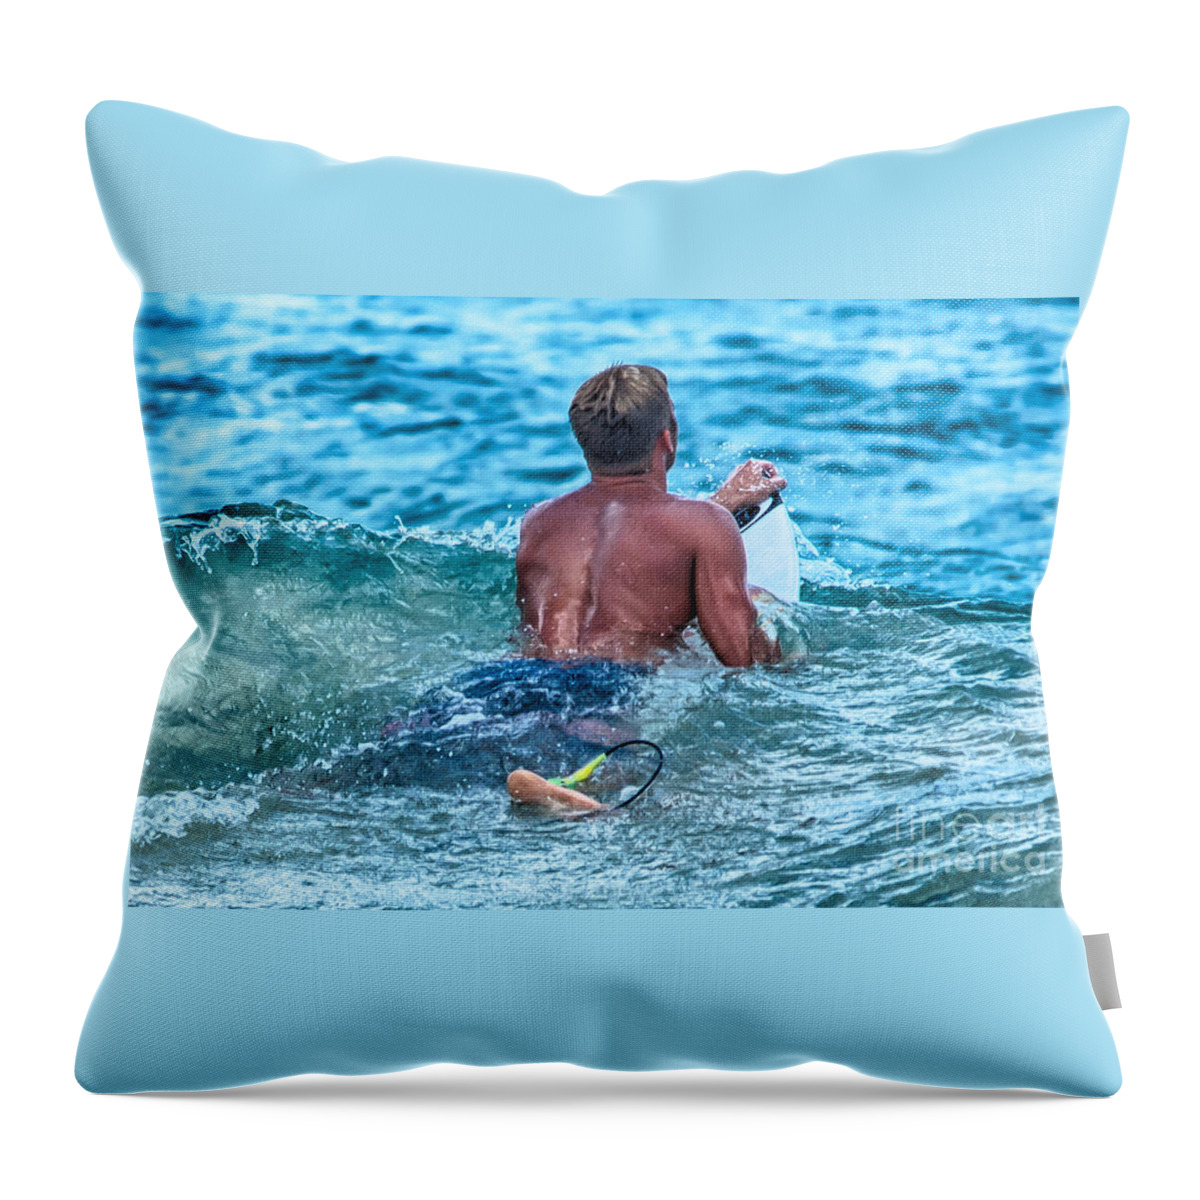 A Surfer Waits And Looks For The Next Wave To Ride. Throw Pillow featuring the photograph In The Lineup by Eye Olating Images